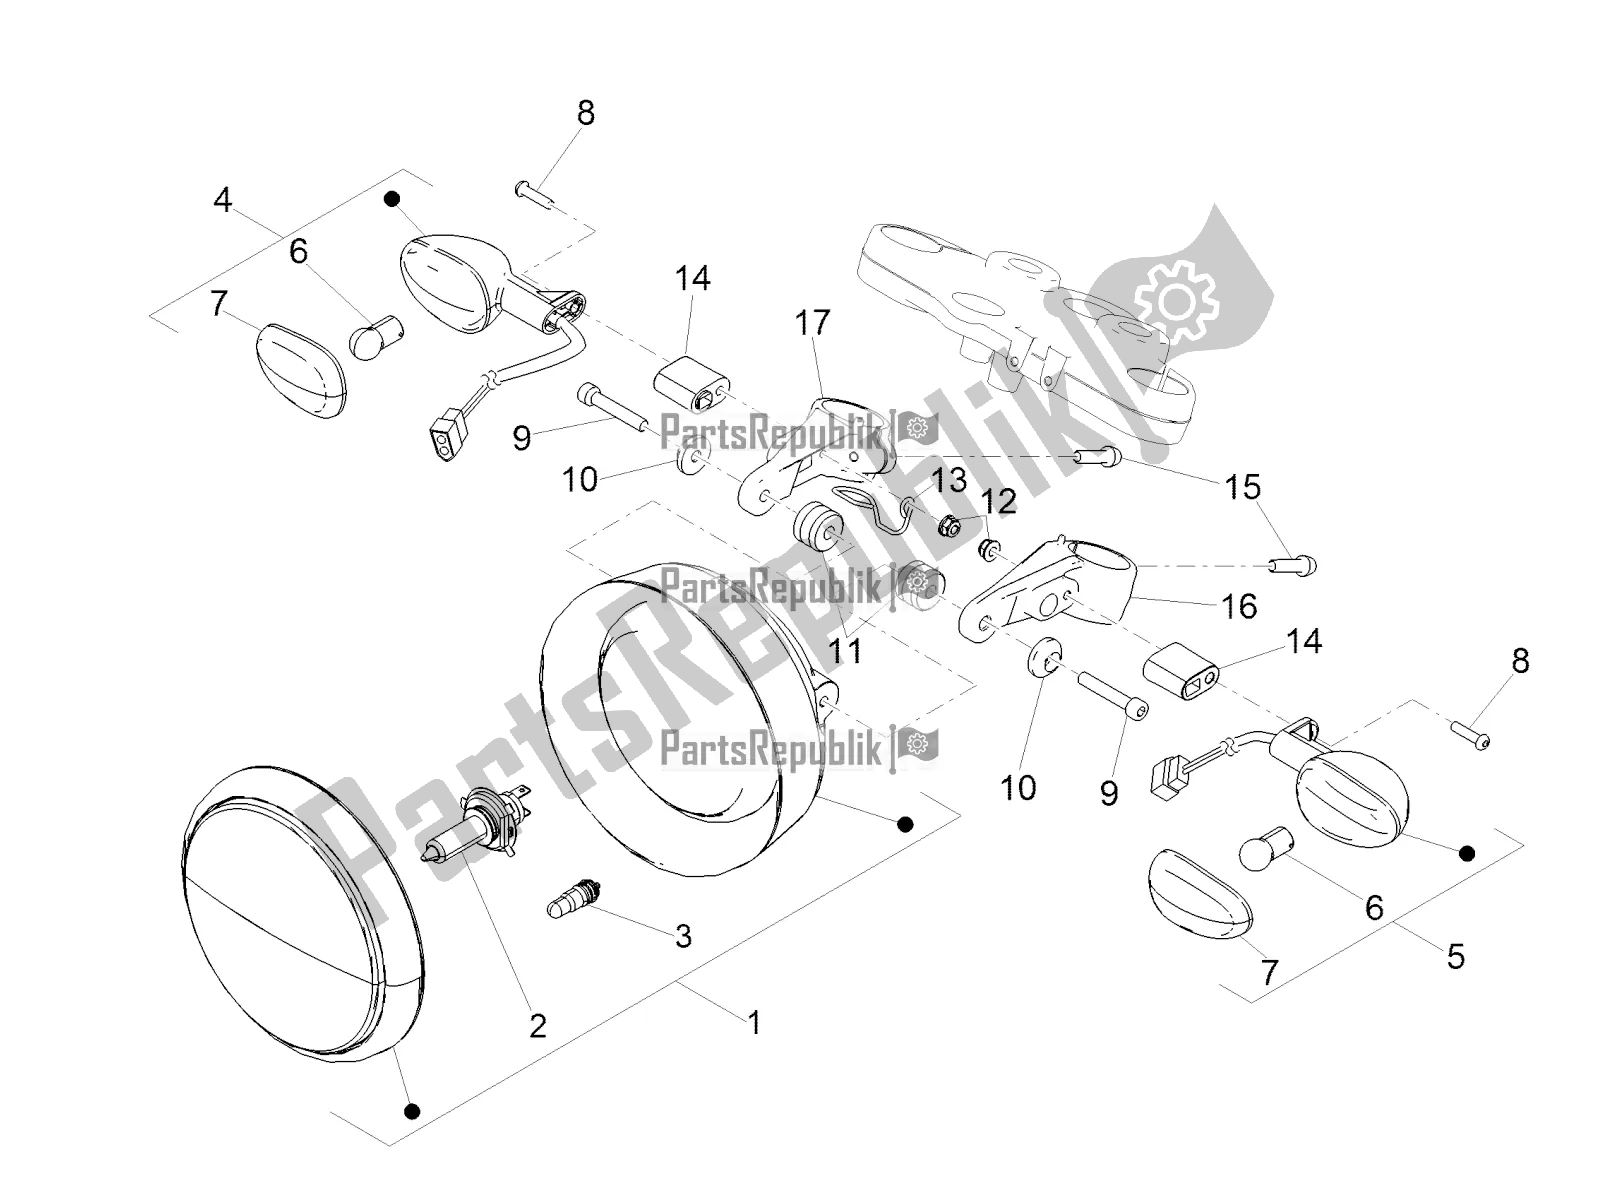 All parts for the Front Lights of the Moto-Guzzi V7 III Racer 750 ABS 2019